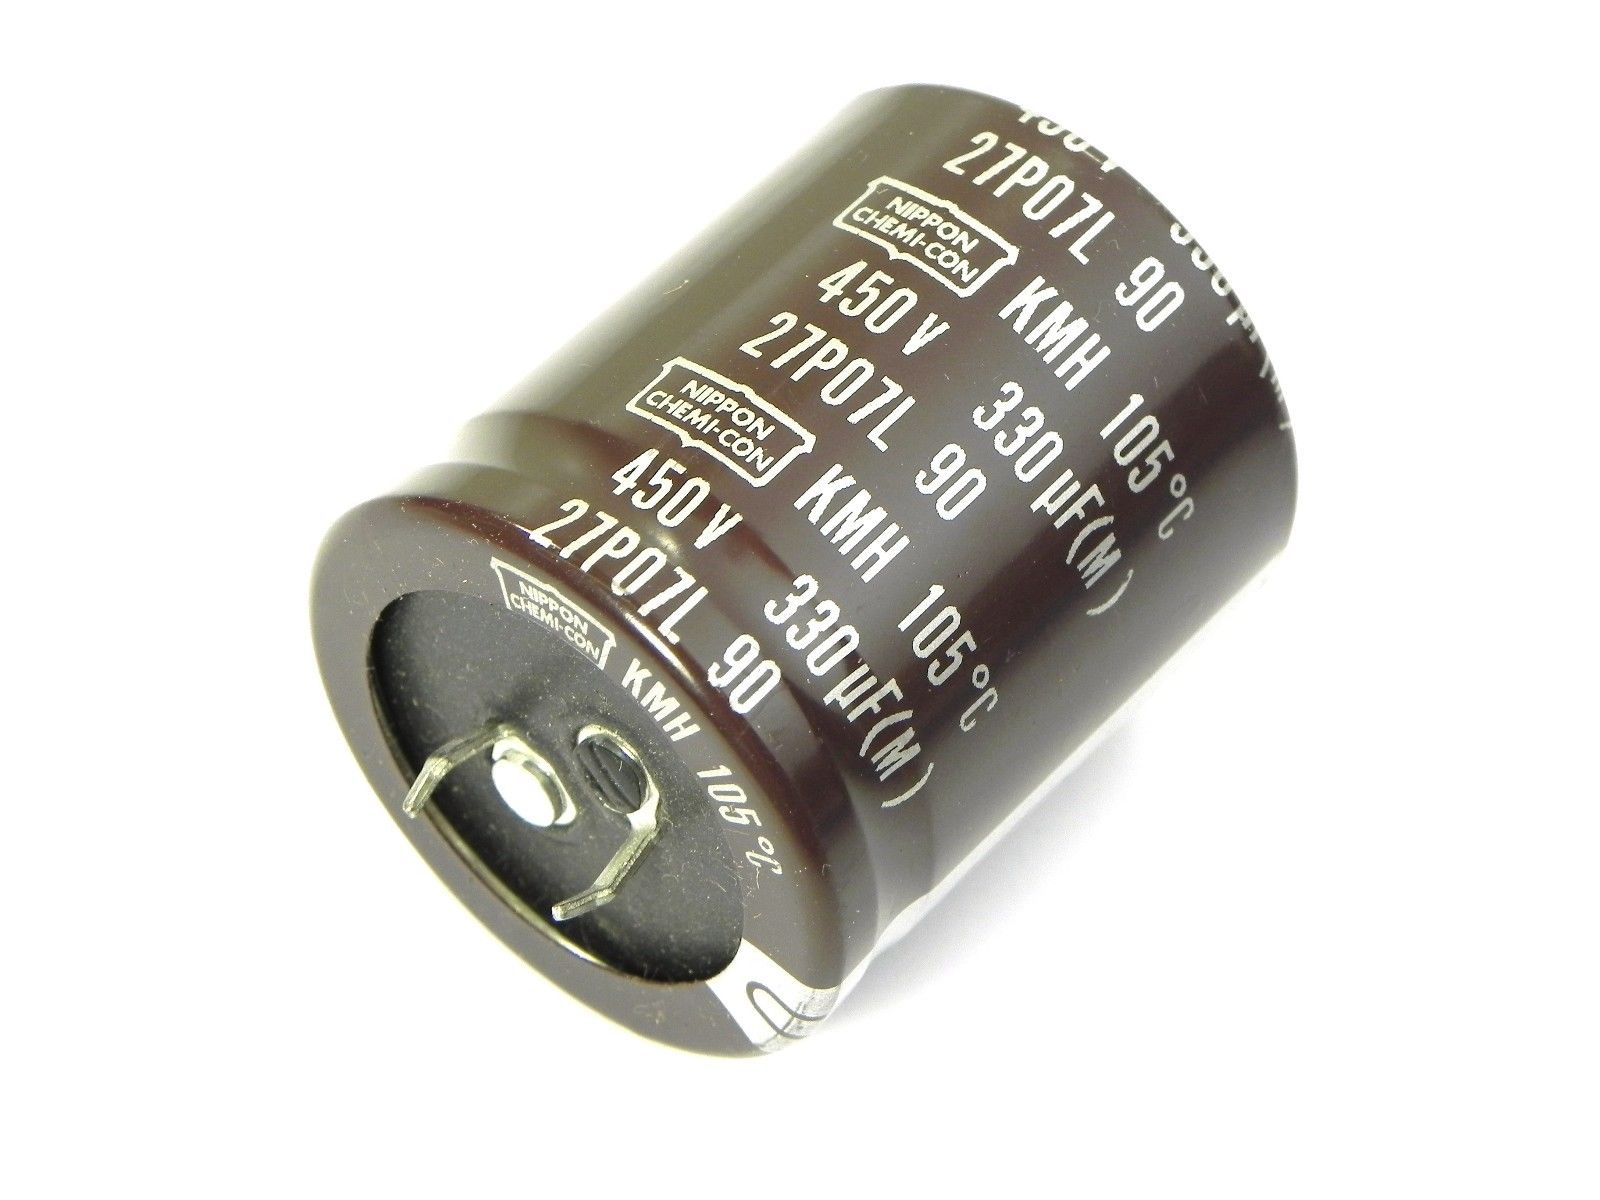 Details about   Nippon Chemi-Con RWF Round Capacitor 3300uf 